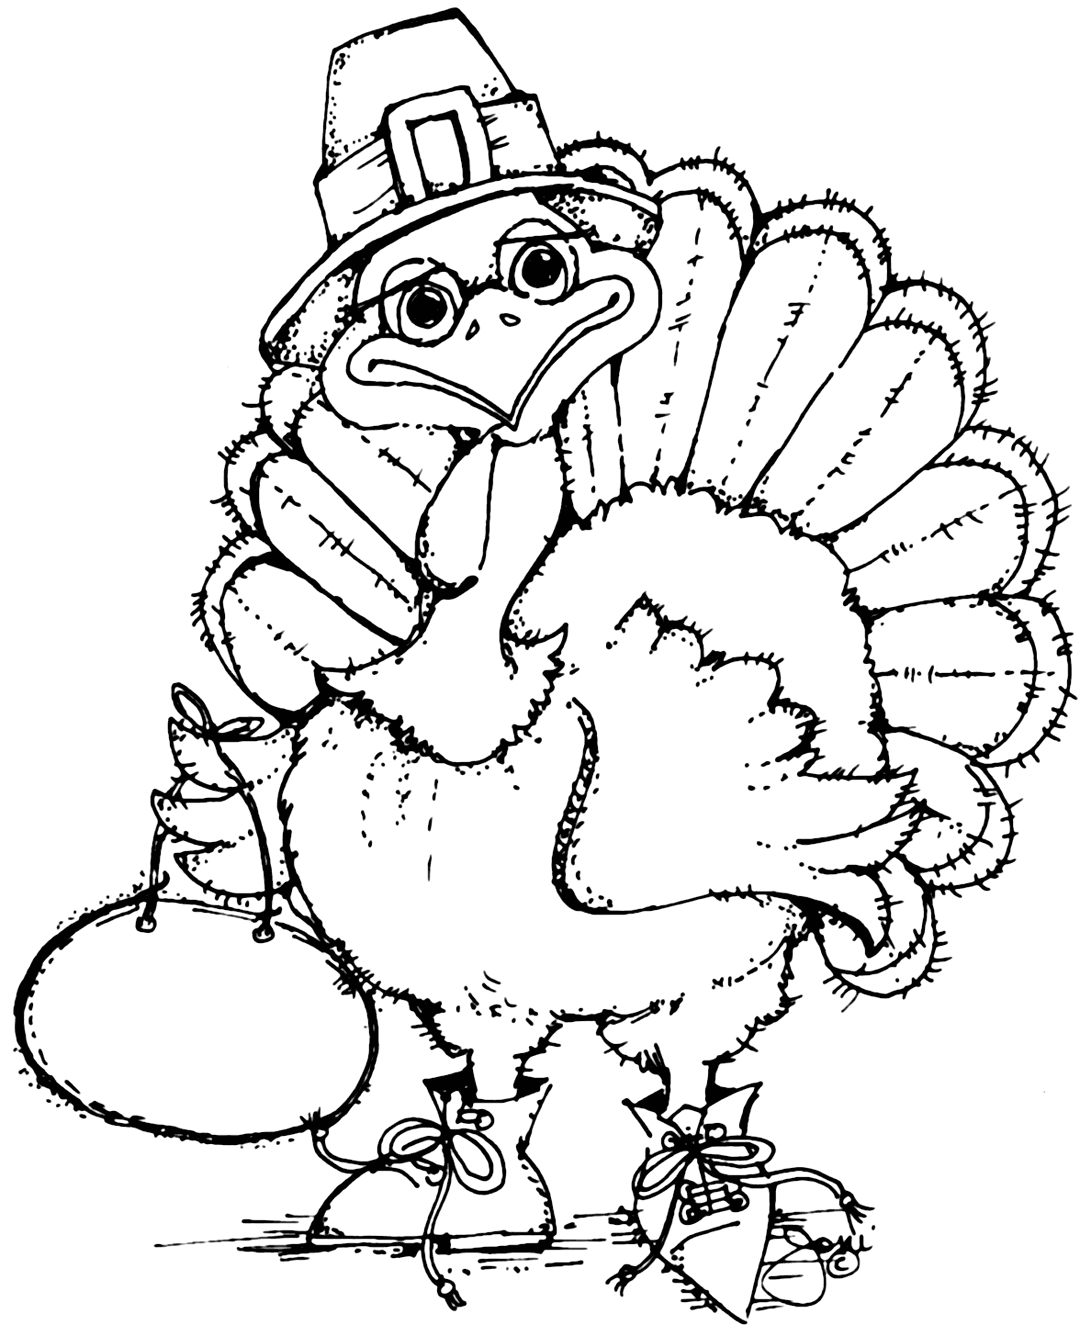 Cute Thanksgiving Turkey Coloring Page